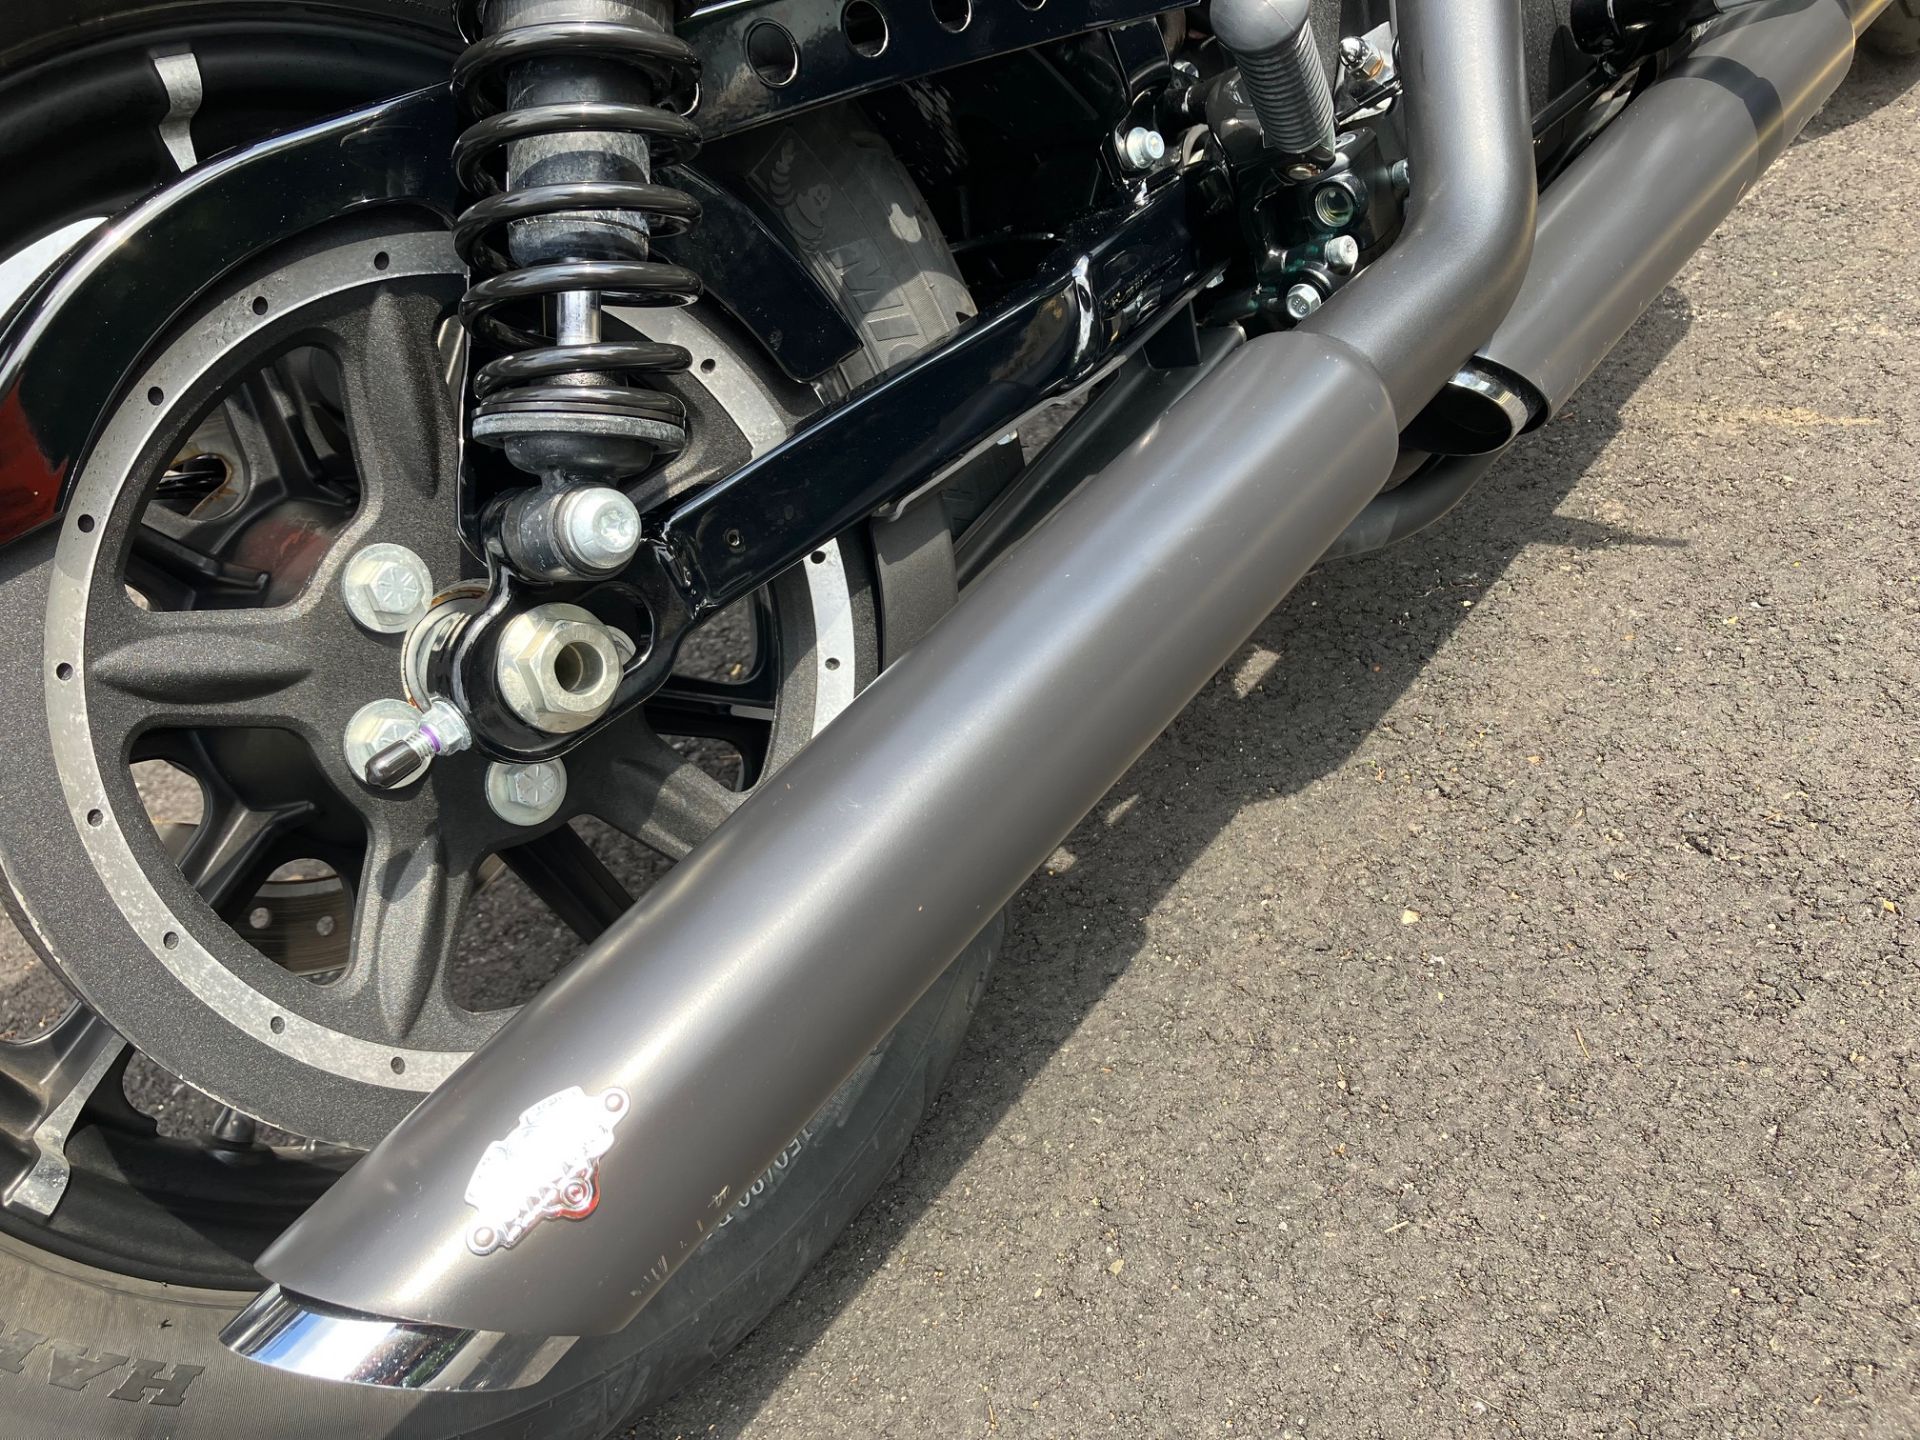 2020 Harley-Davidson IRON 883 in West Long Branch, New Jersey - Photo 9